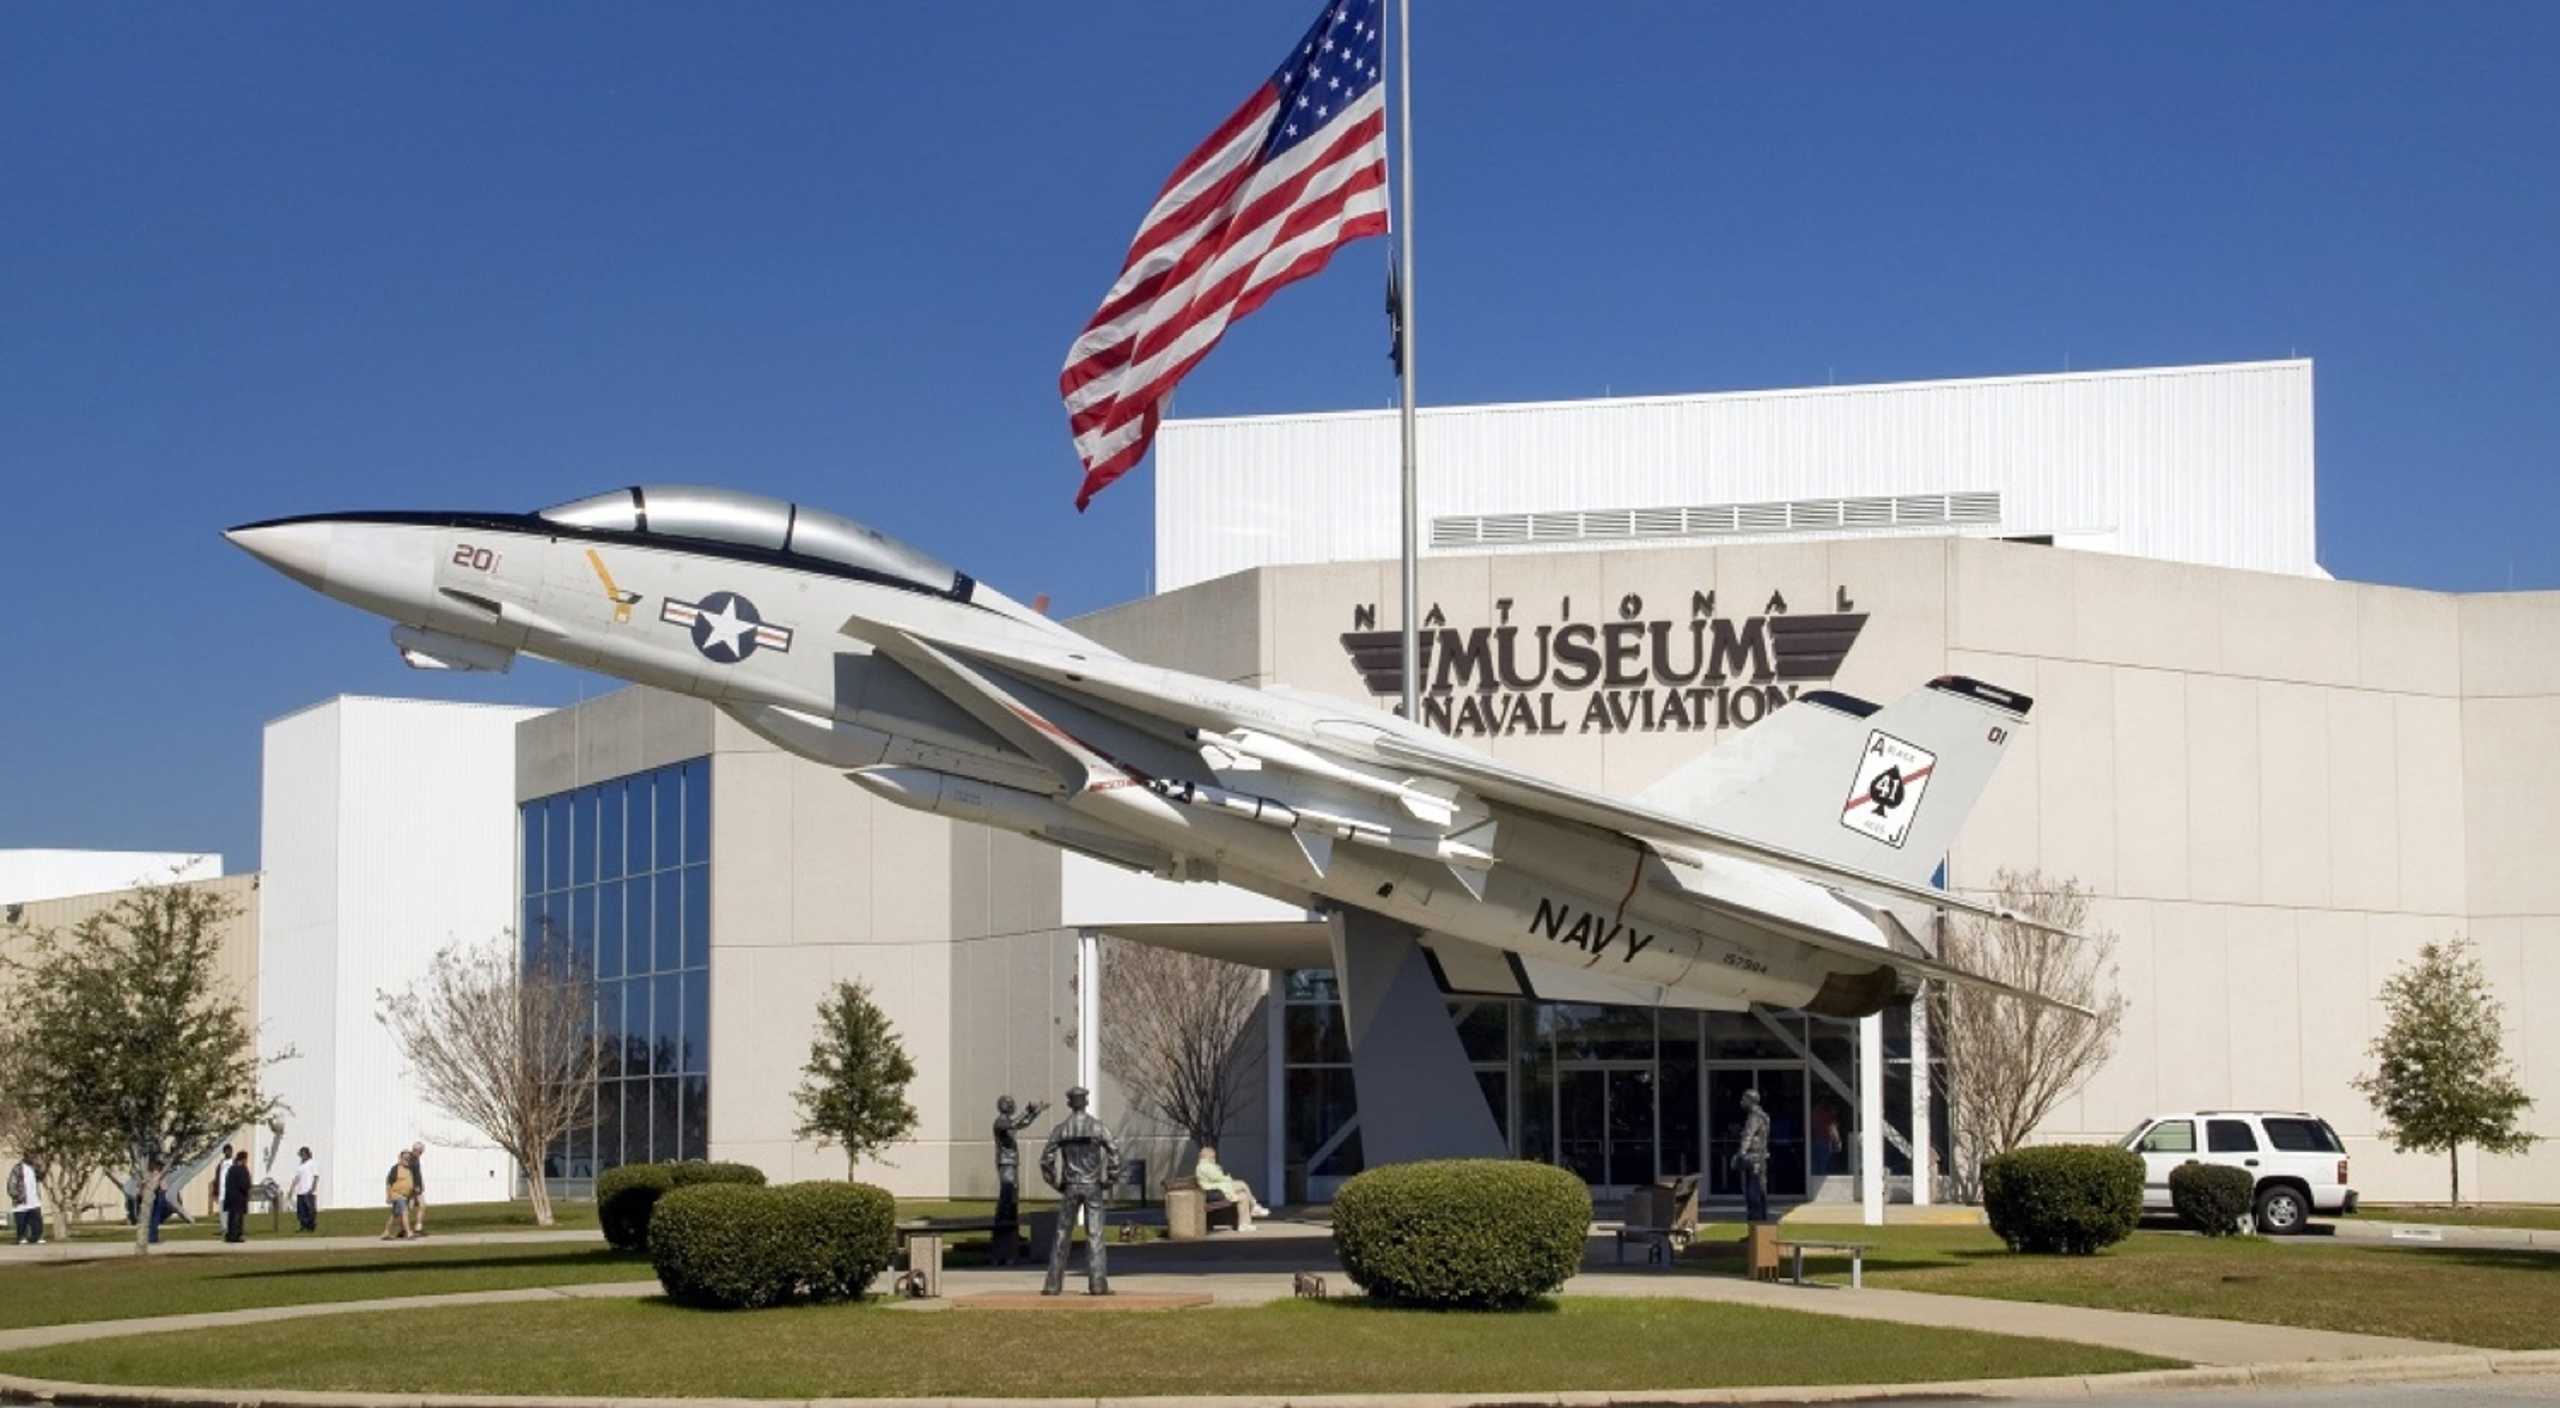 Home of the naval aviation museum and national flight academy